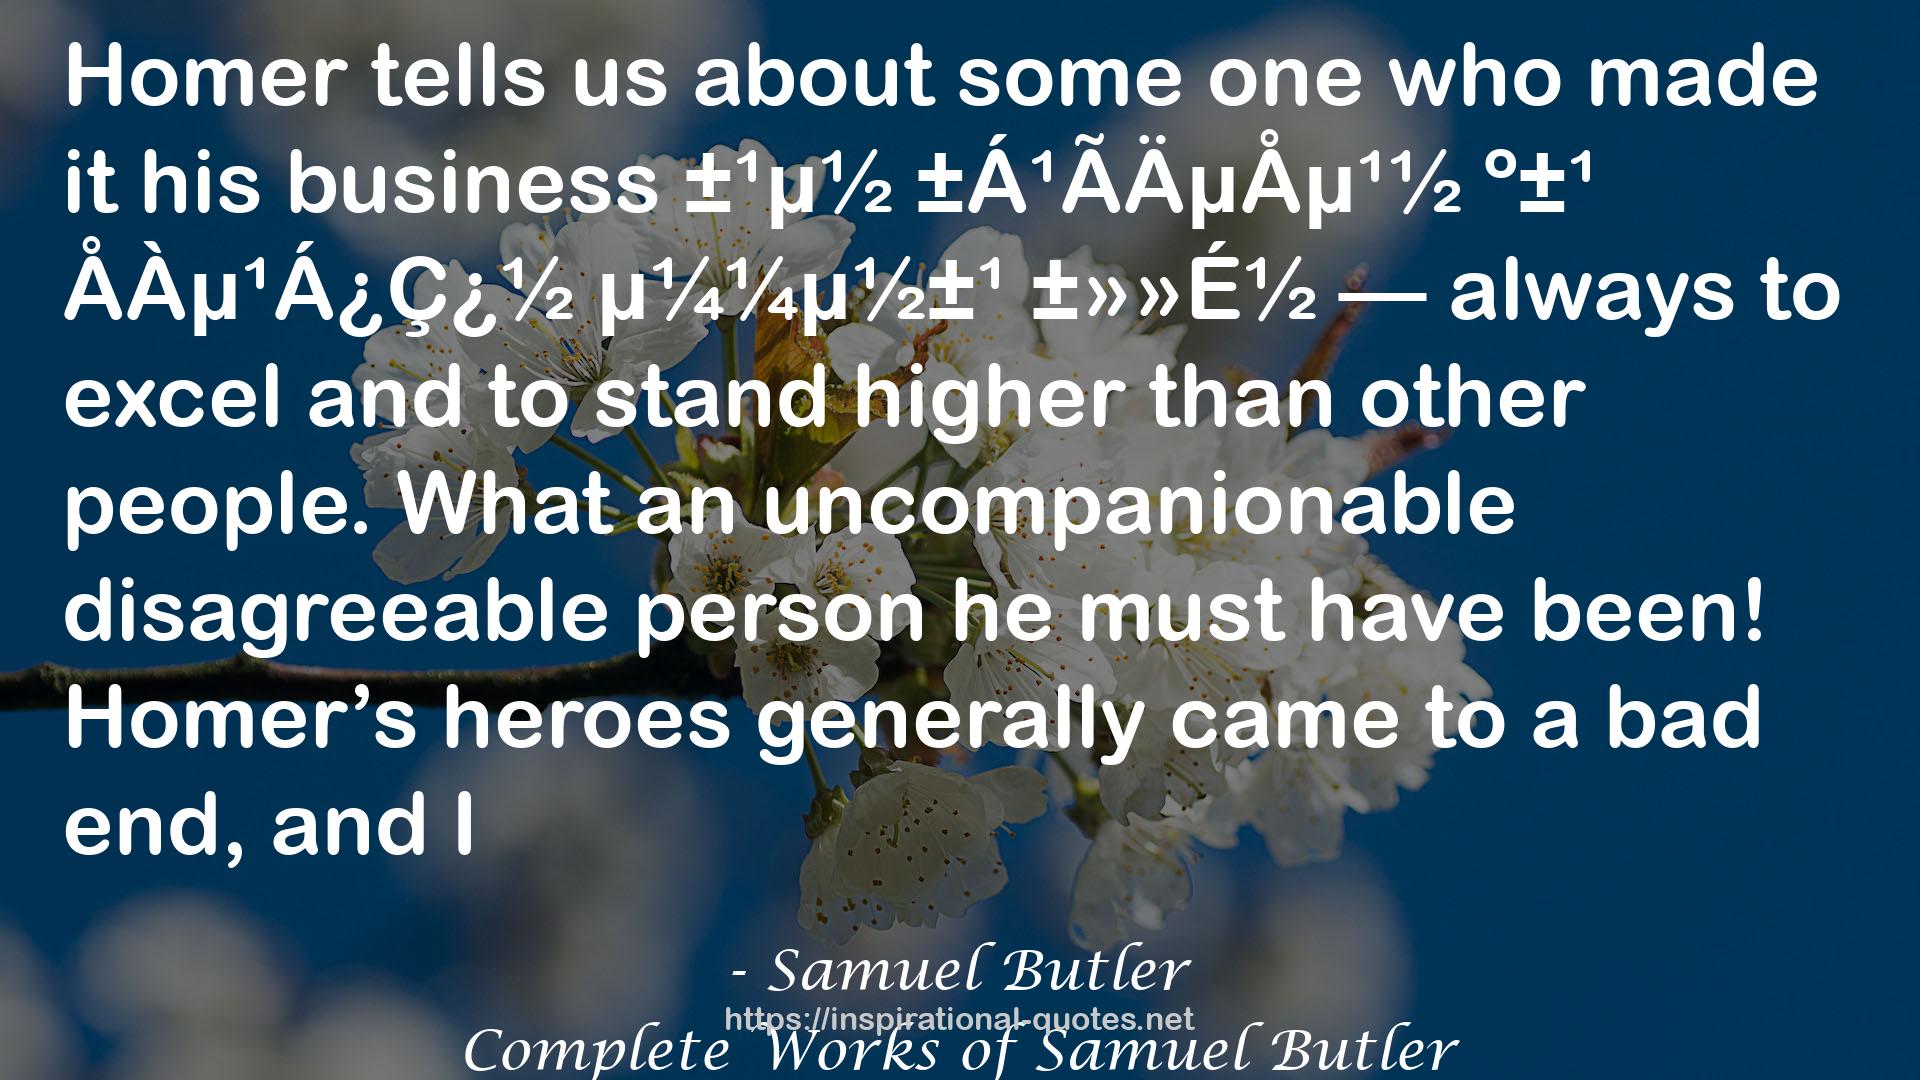 Complete Works of Samuel Butler QUOTES